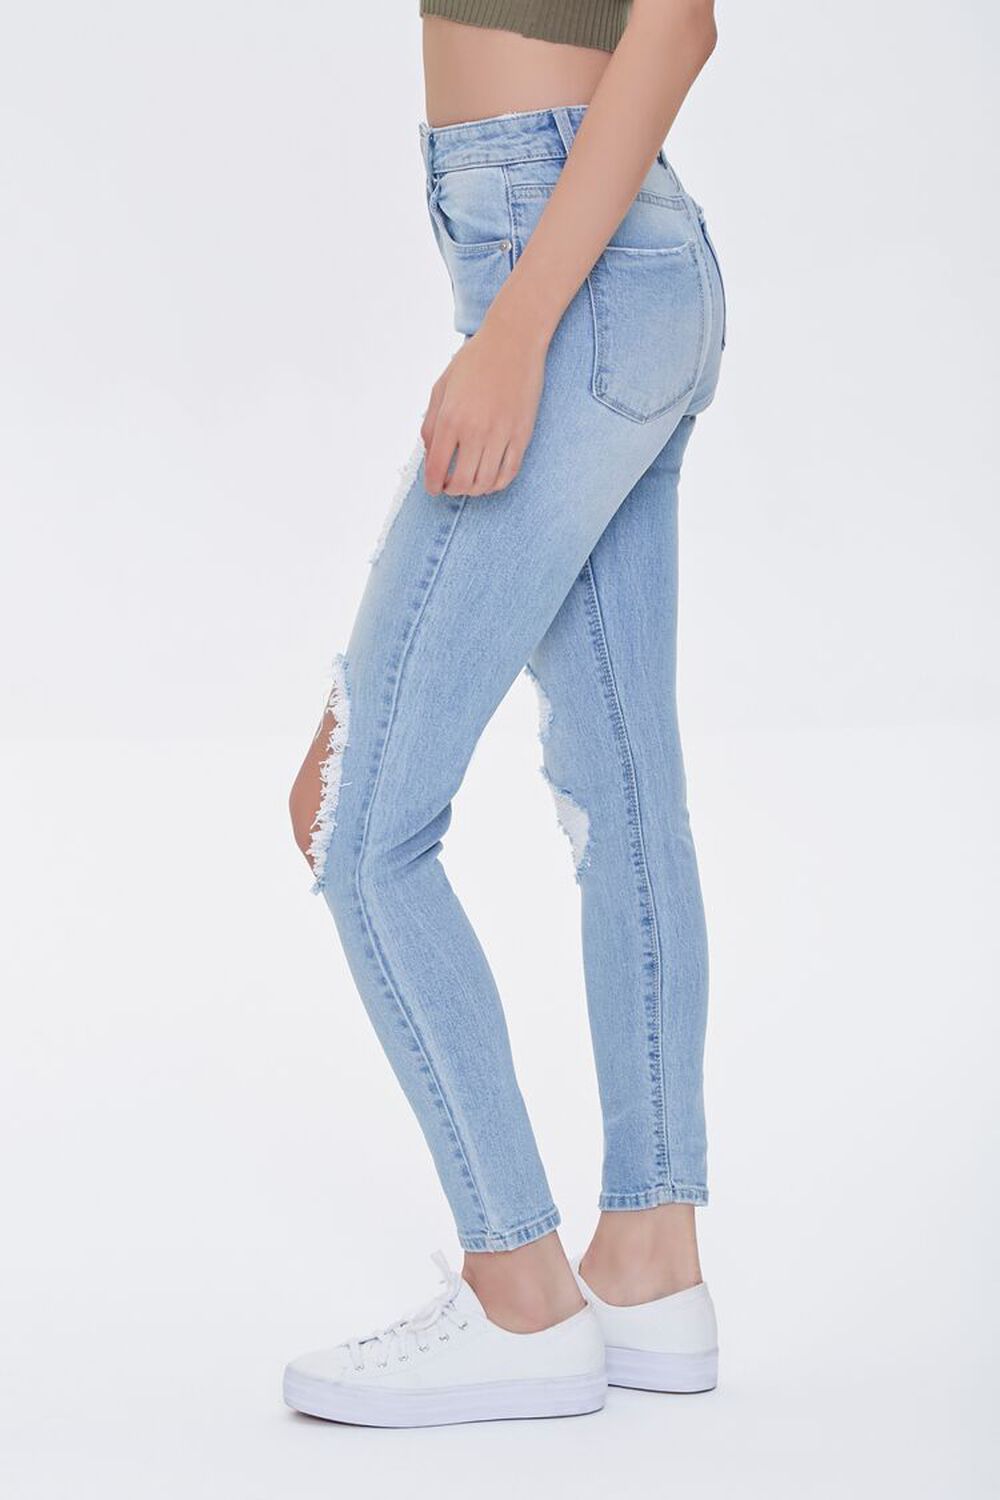 LIGHT DENIM Recycled Cotton 12% High-Rise Skinny Jeans, image 2